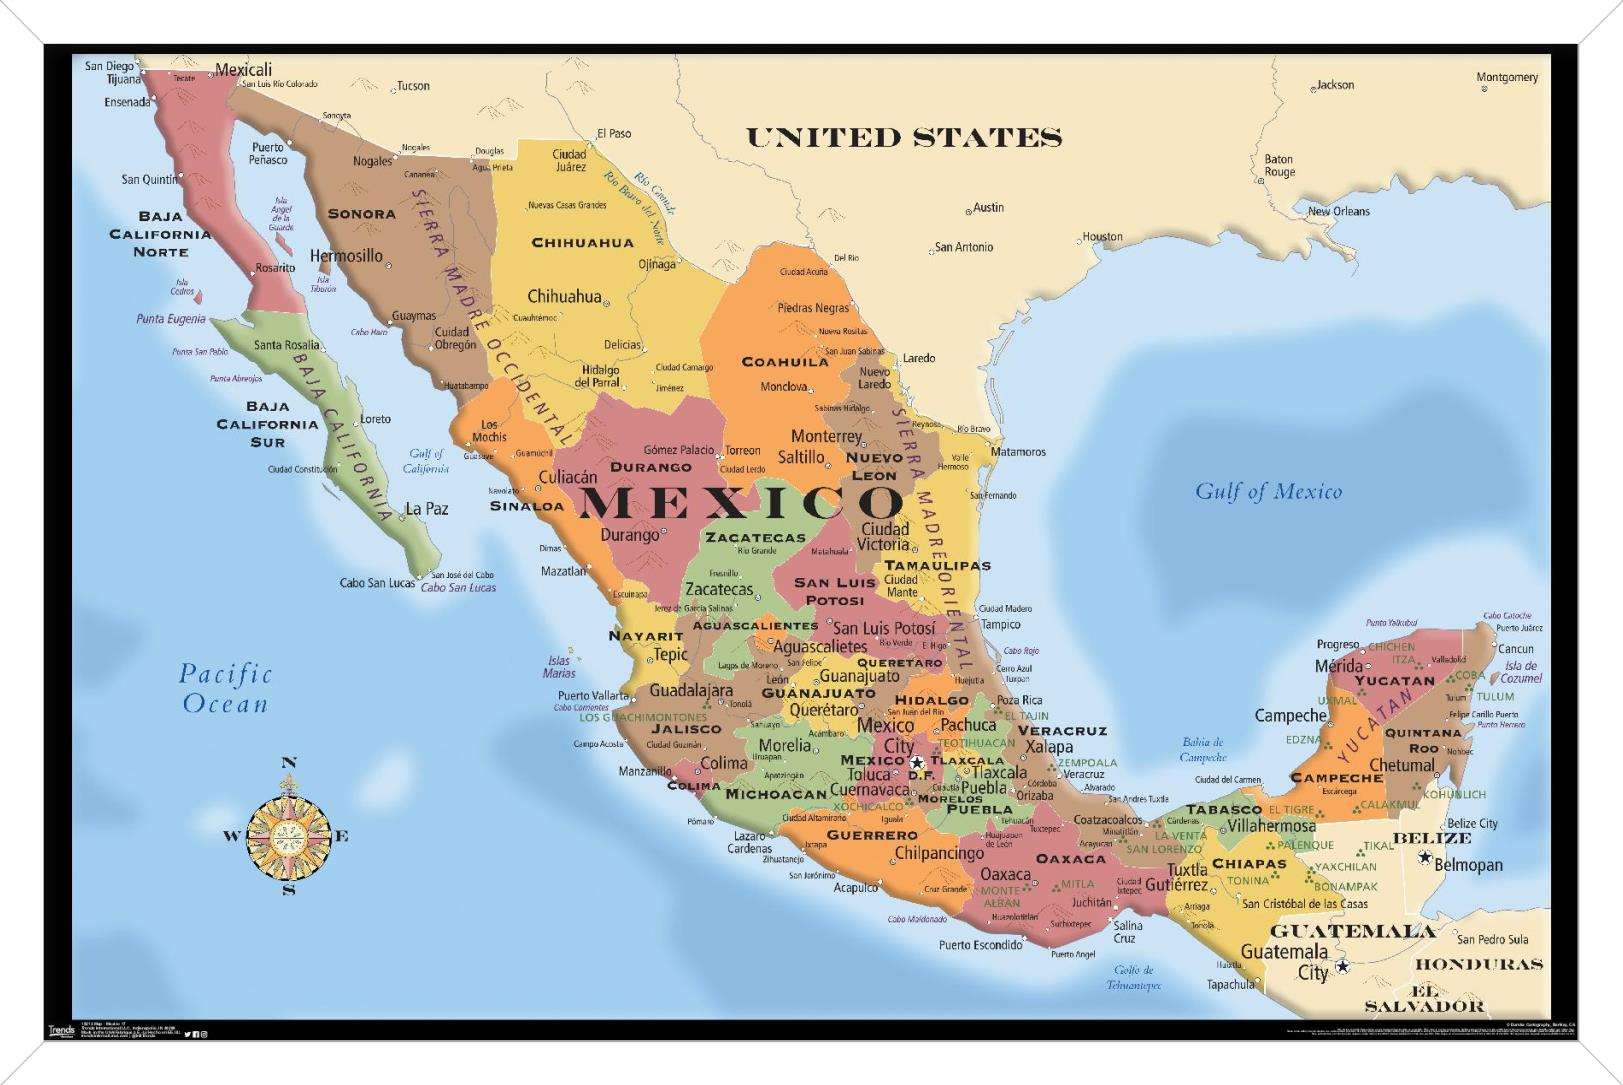 Map - Mexico Wall Poster, 14.725" x 22.375", Framed - image 1 of 5